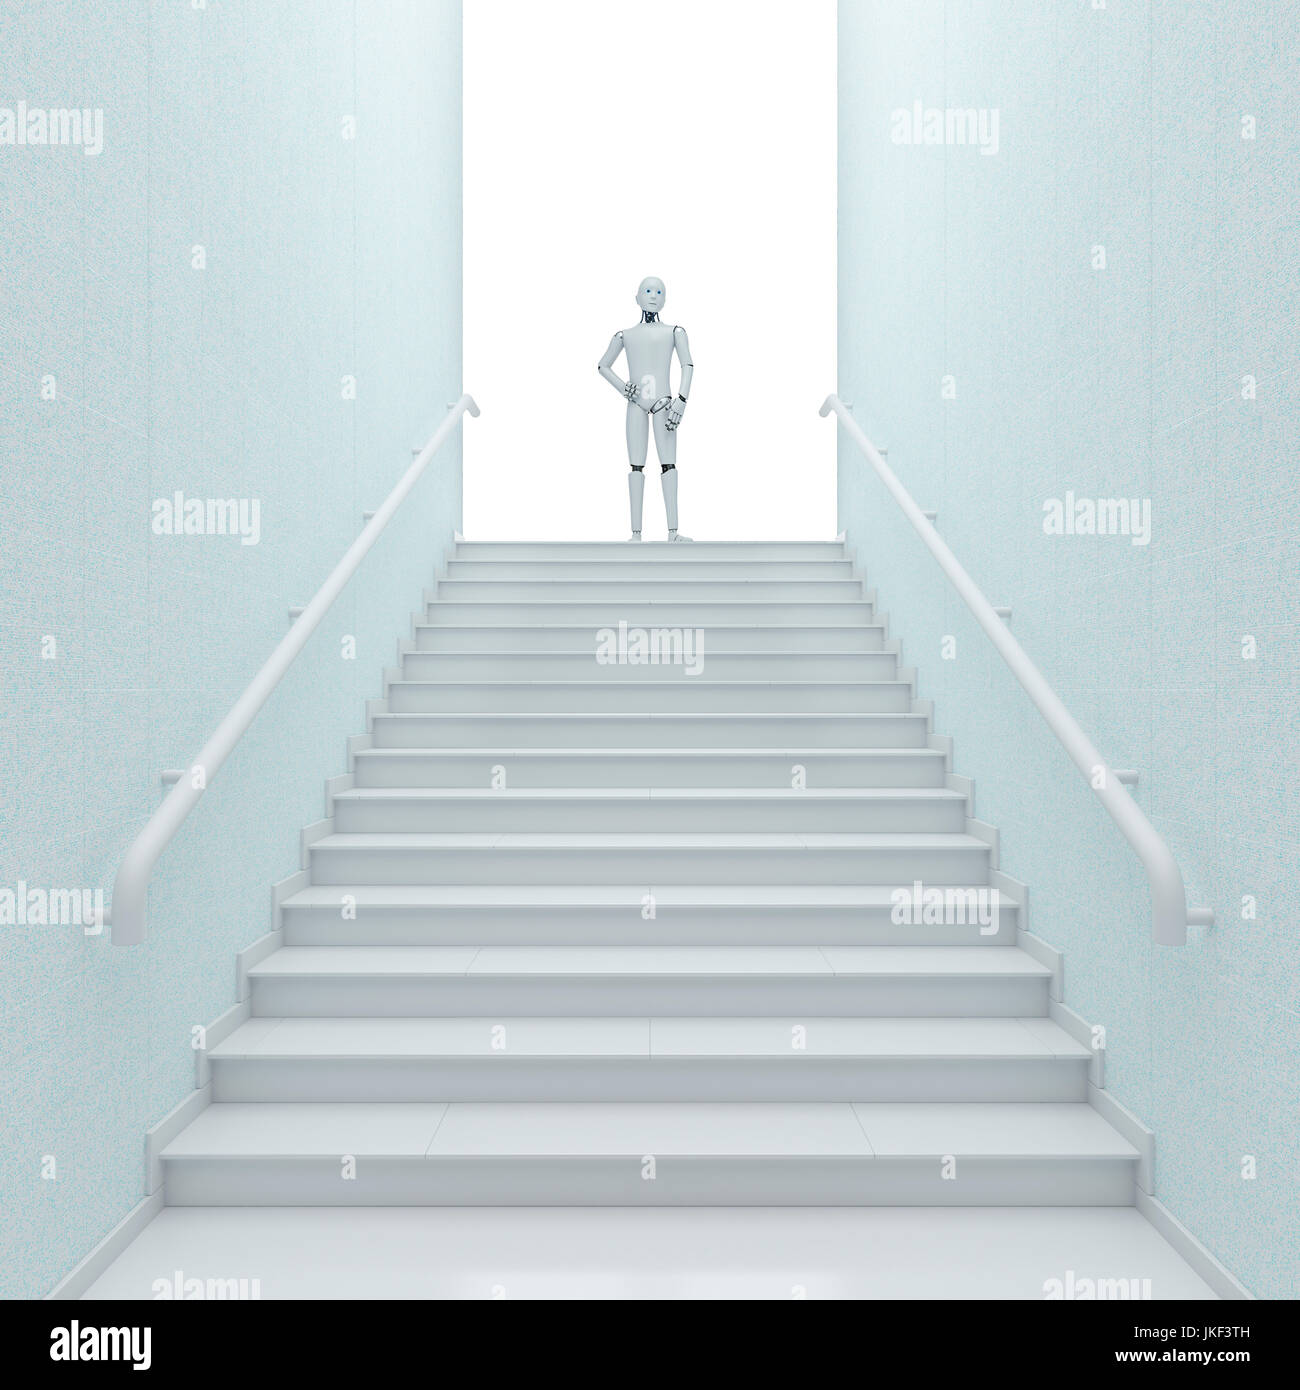 Robot standing on top of stairs, 3d rendering Stock Photo